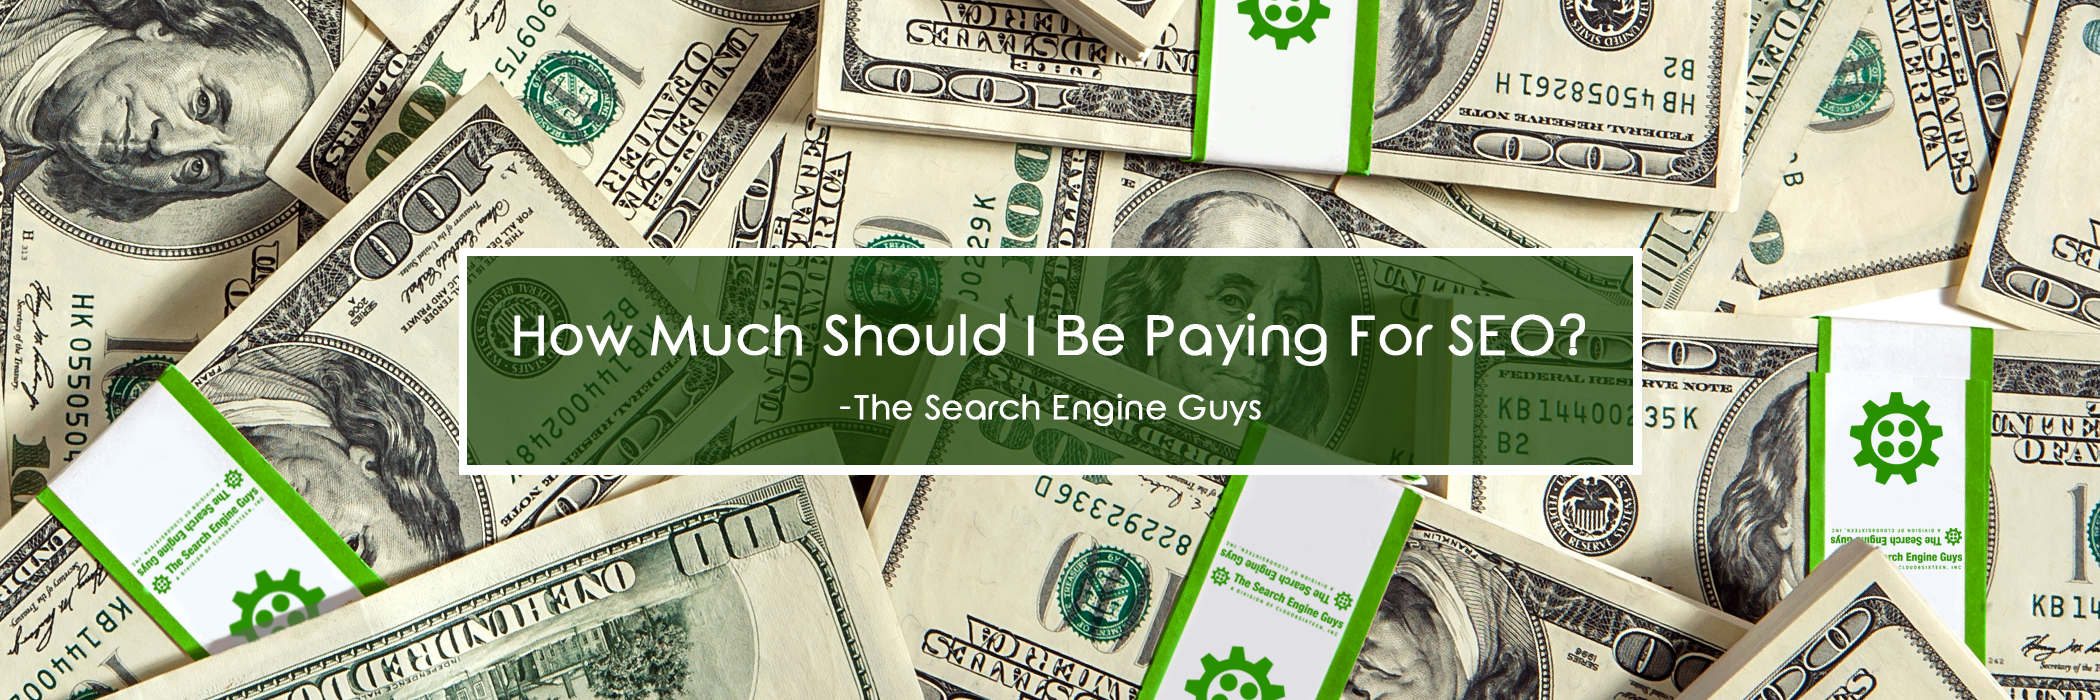 How much Should I be paying for SEO?